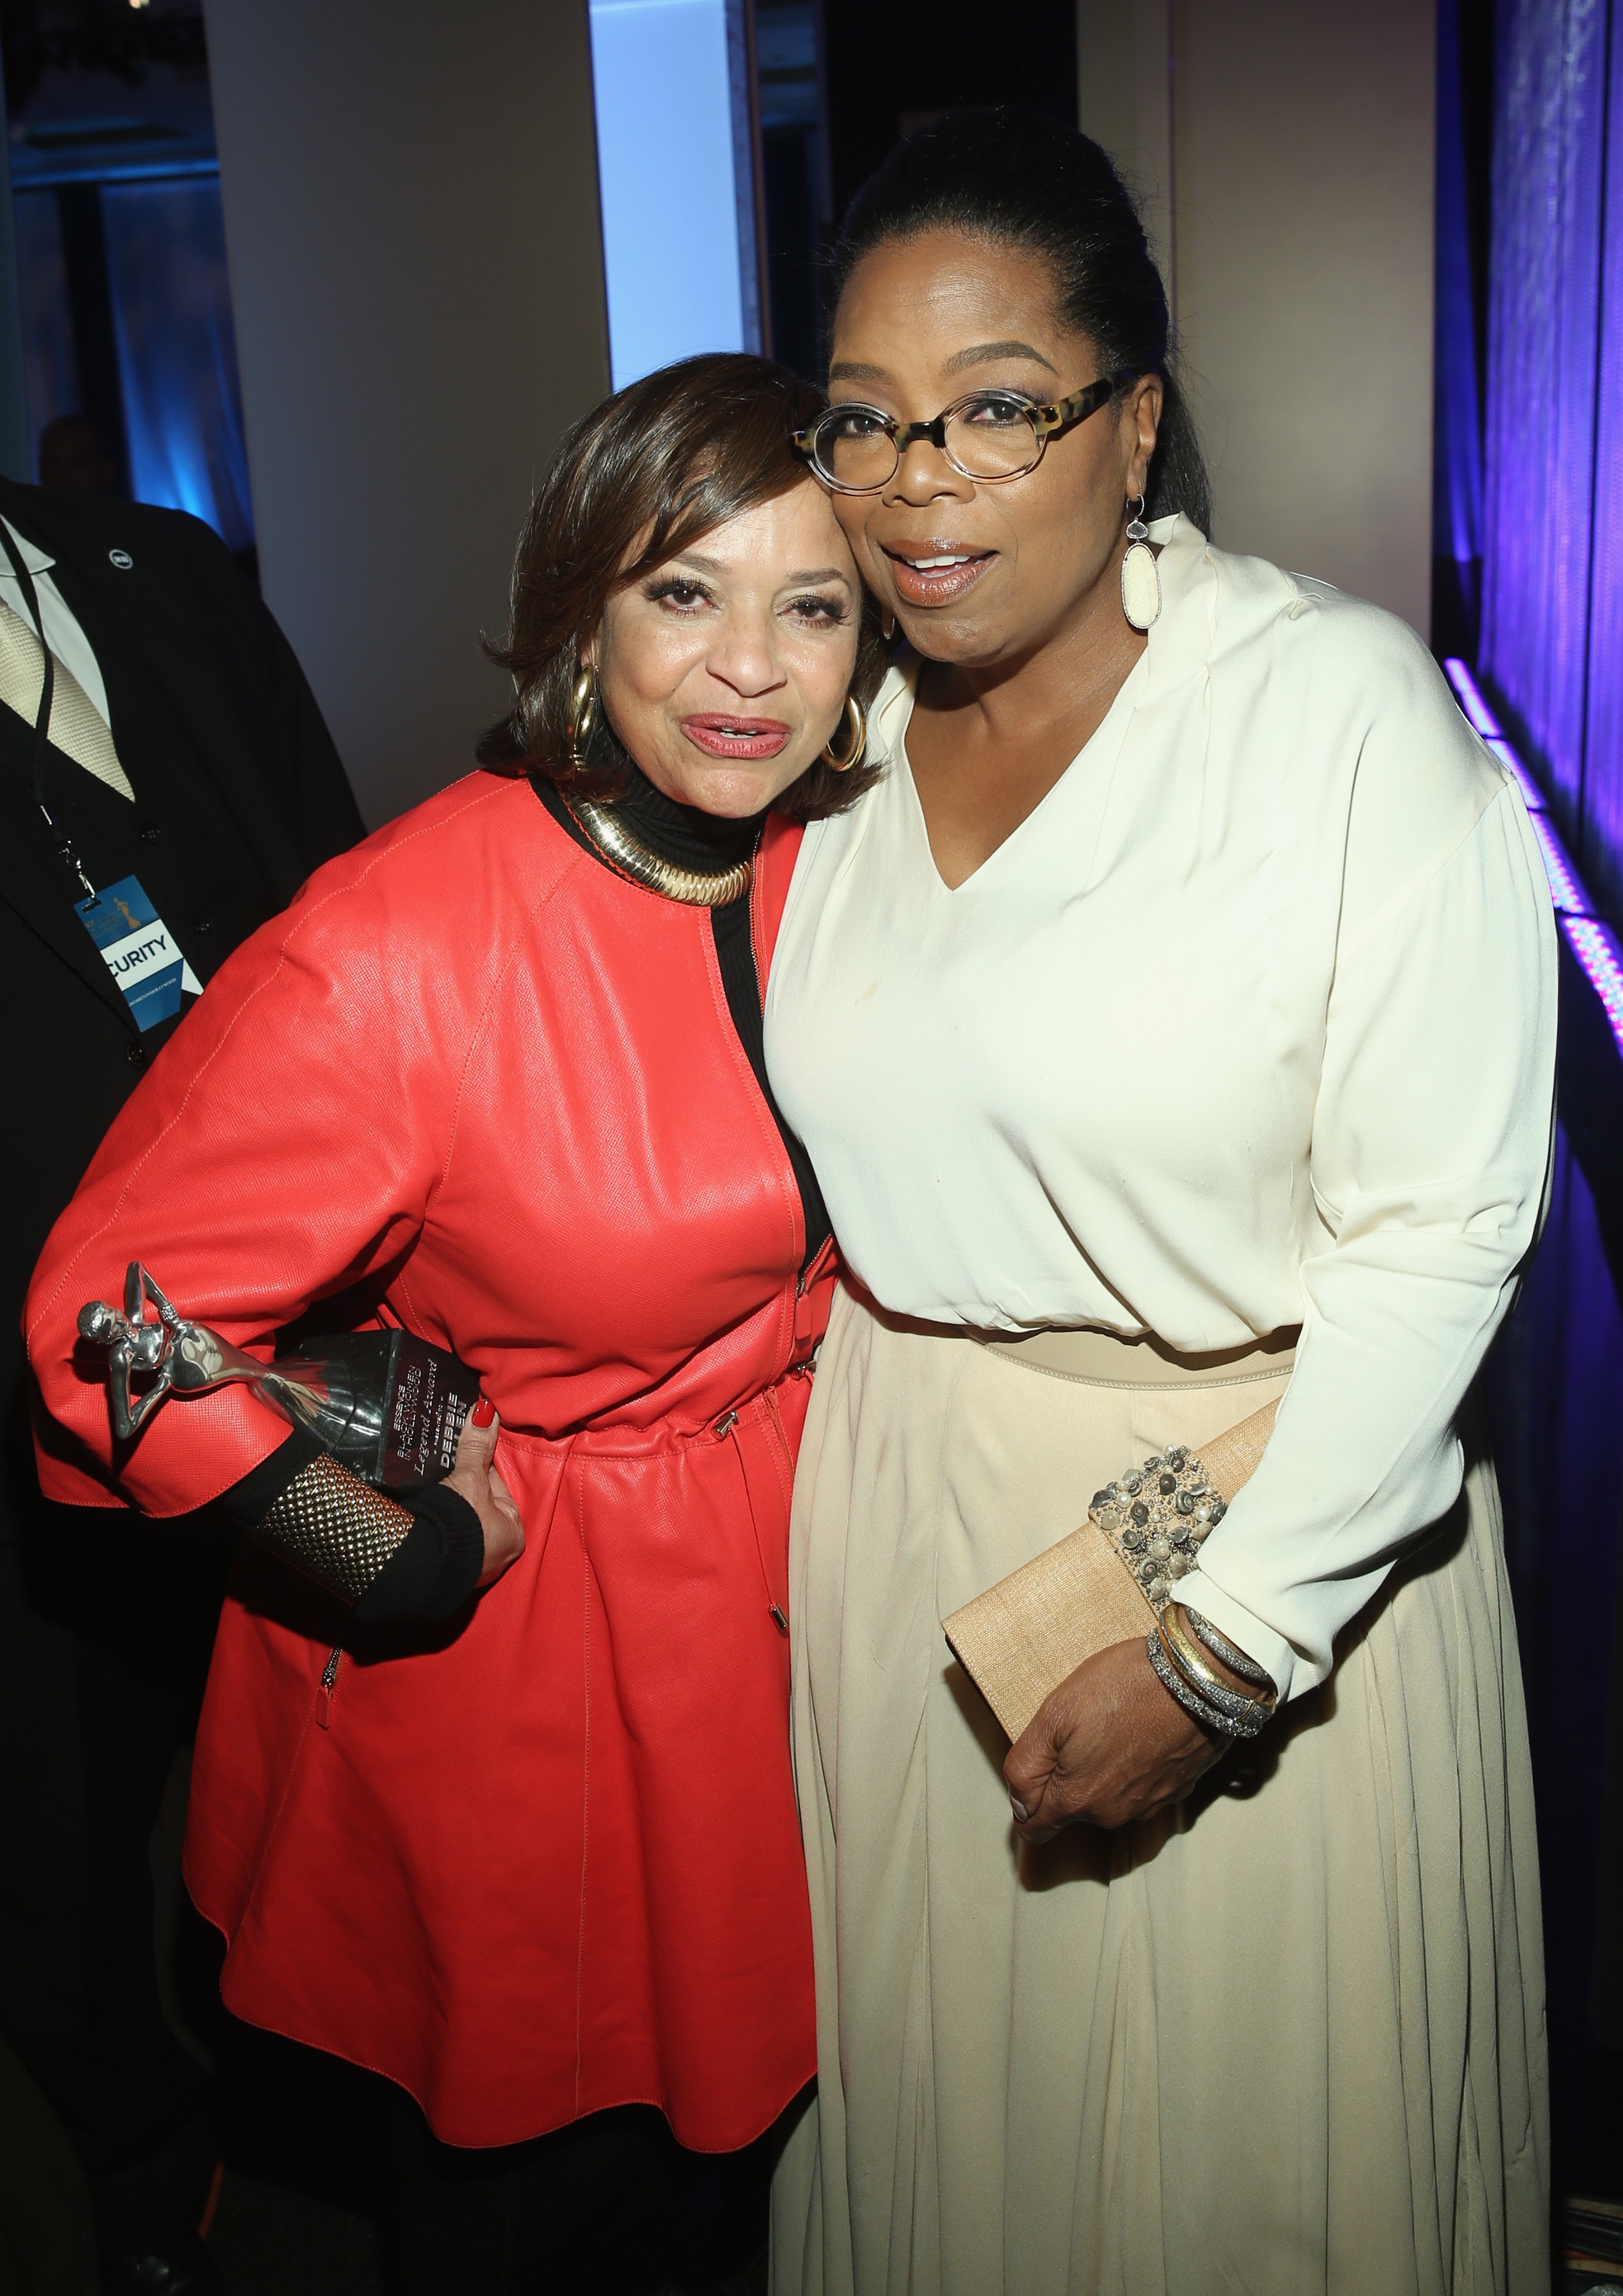 BEVERLY HILLS, CA - FEBRUARY 25:  Honoree Debbie Allen (L) and Oprah Winfrey attend the 2016 ESSENCE Black Women In Hollywood awards luncheon at the Beverly Wilshire Four Seasons Hotel on February 25, 2016 in Beverly Hills, California.  (Photo by Jesse Grant/Getty Images for ESSENCE)